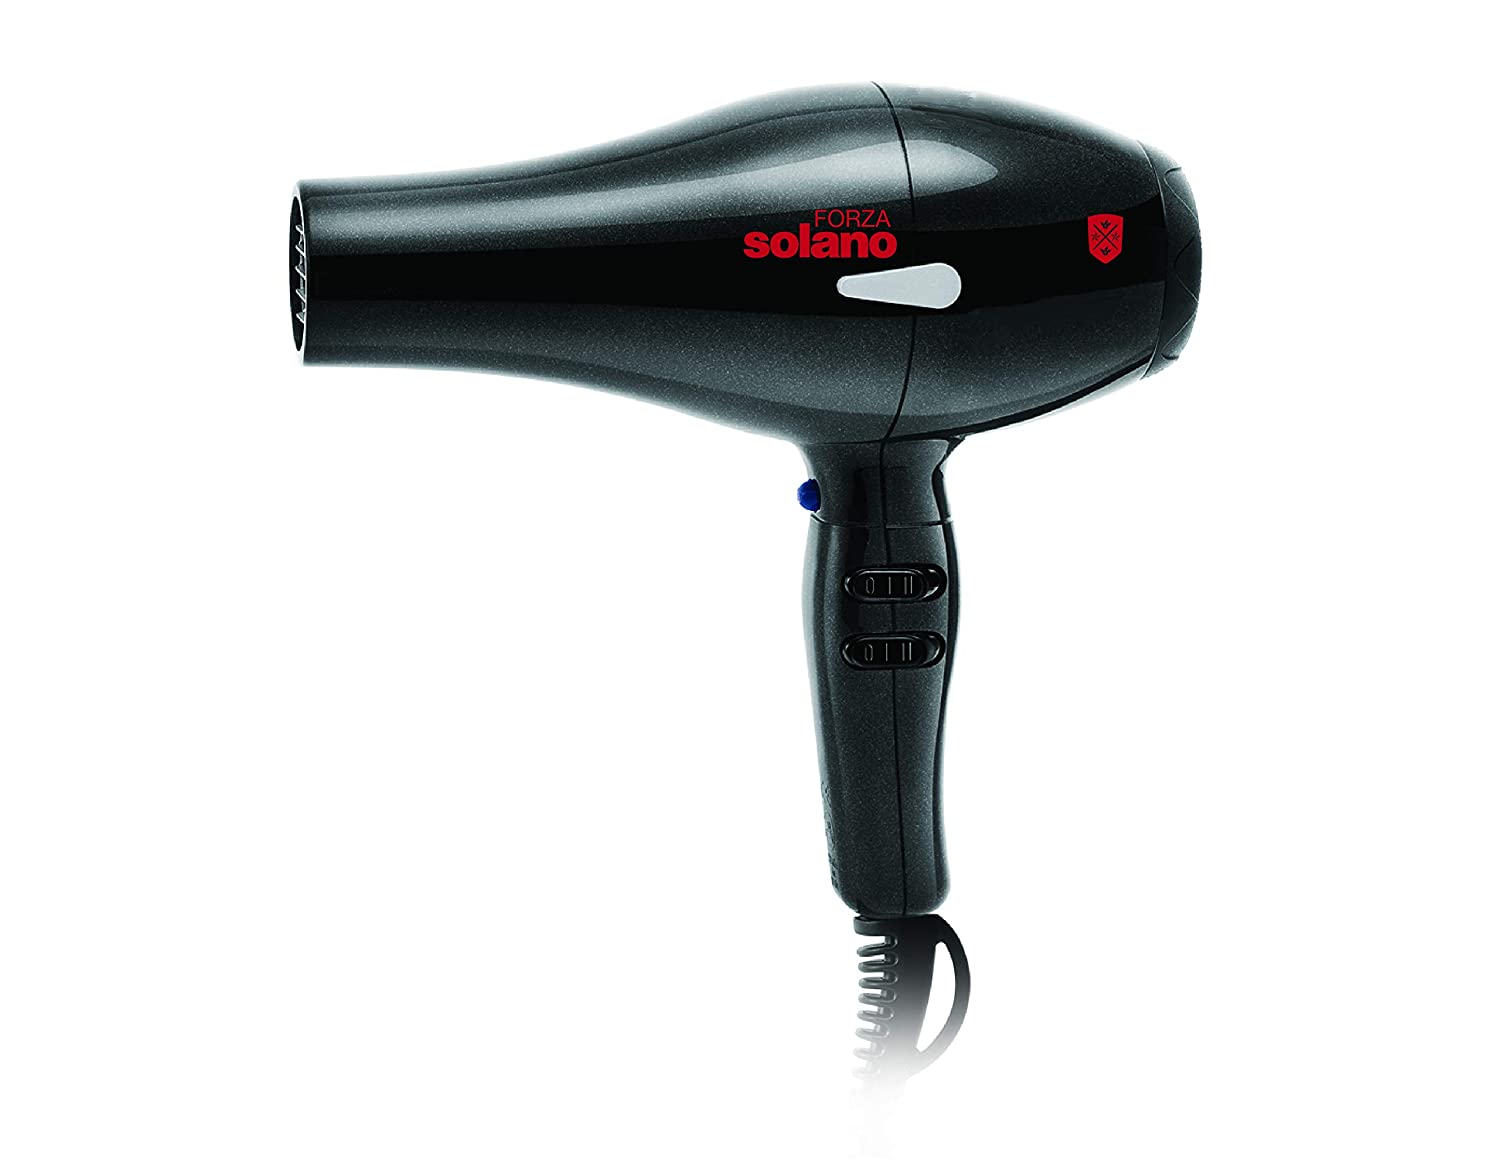 top 10 best hair dryers 2020 best blowdryers for every hair need herstylecode Top 10 Best Hair Dryers 2022 - Best Blowdryers for Every Hair Need